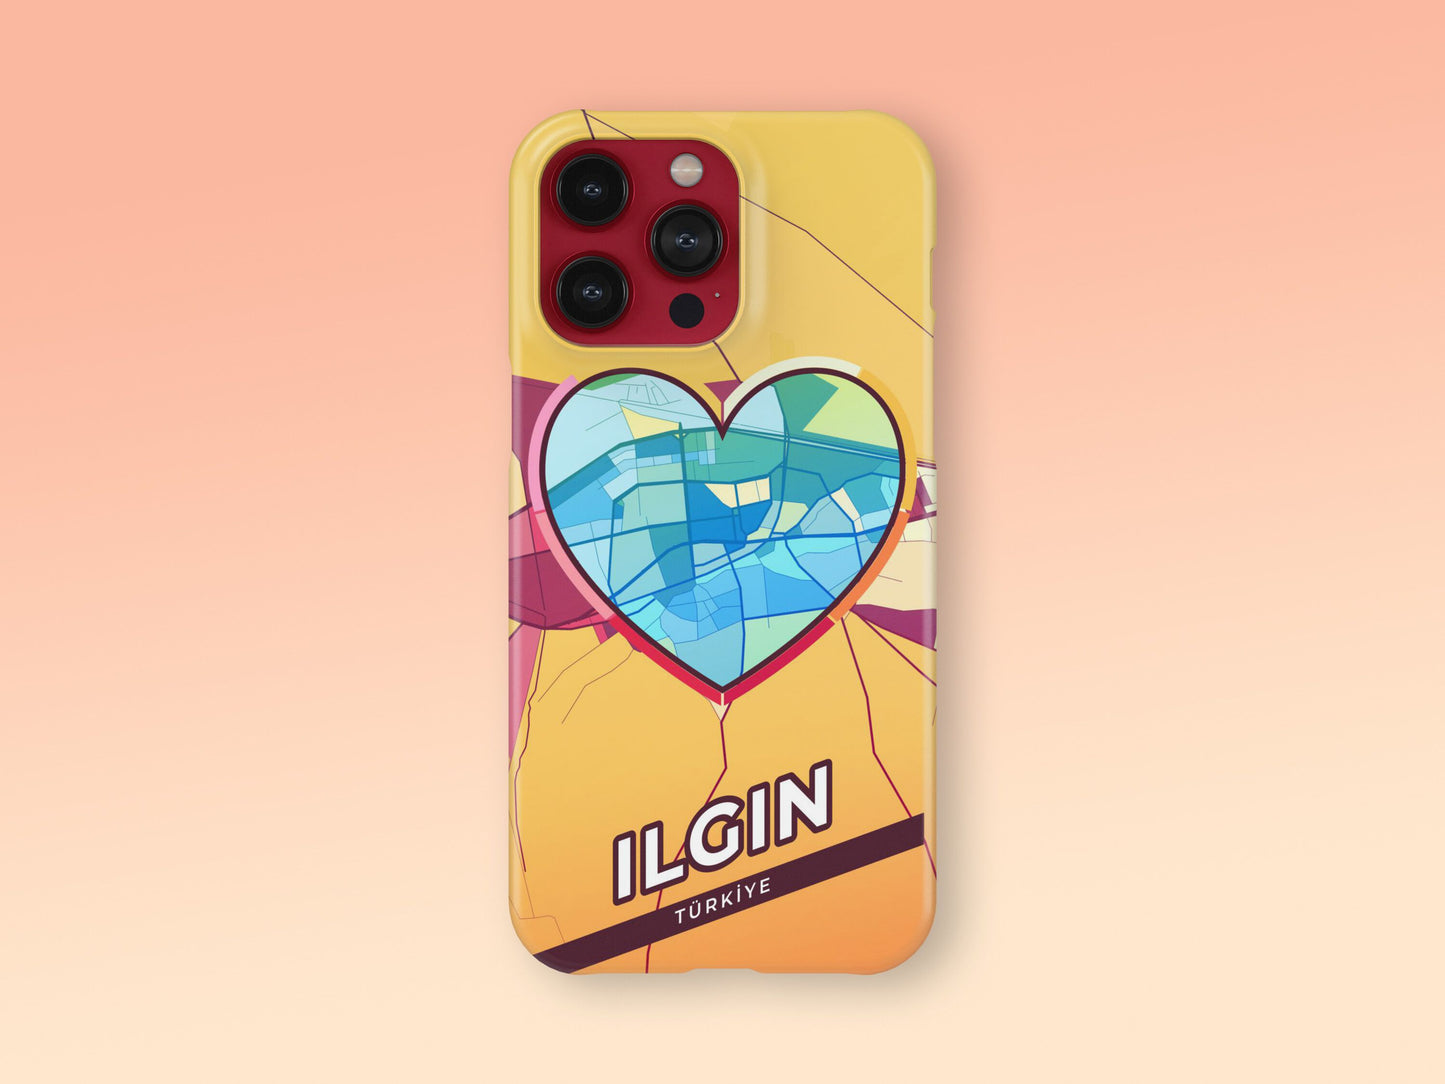 Ilgın Turkey slim phone case with colorful icon. Birthday, wedding or housewarming gift. Couple match cases. 2